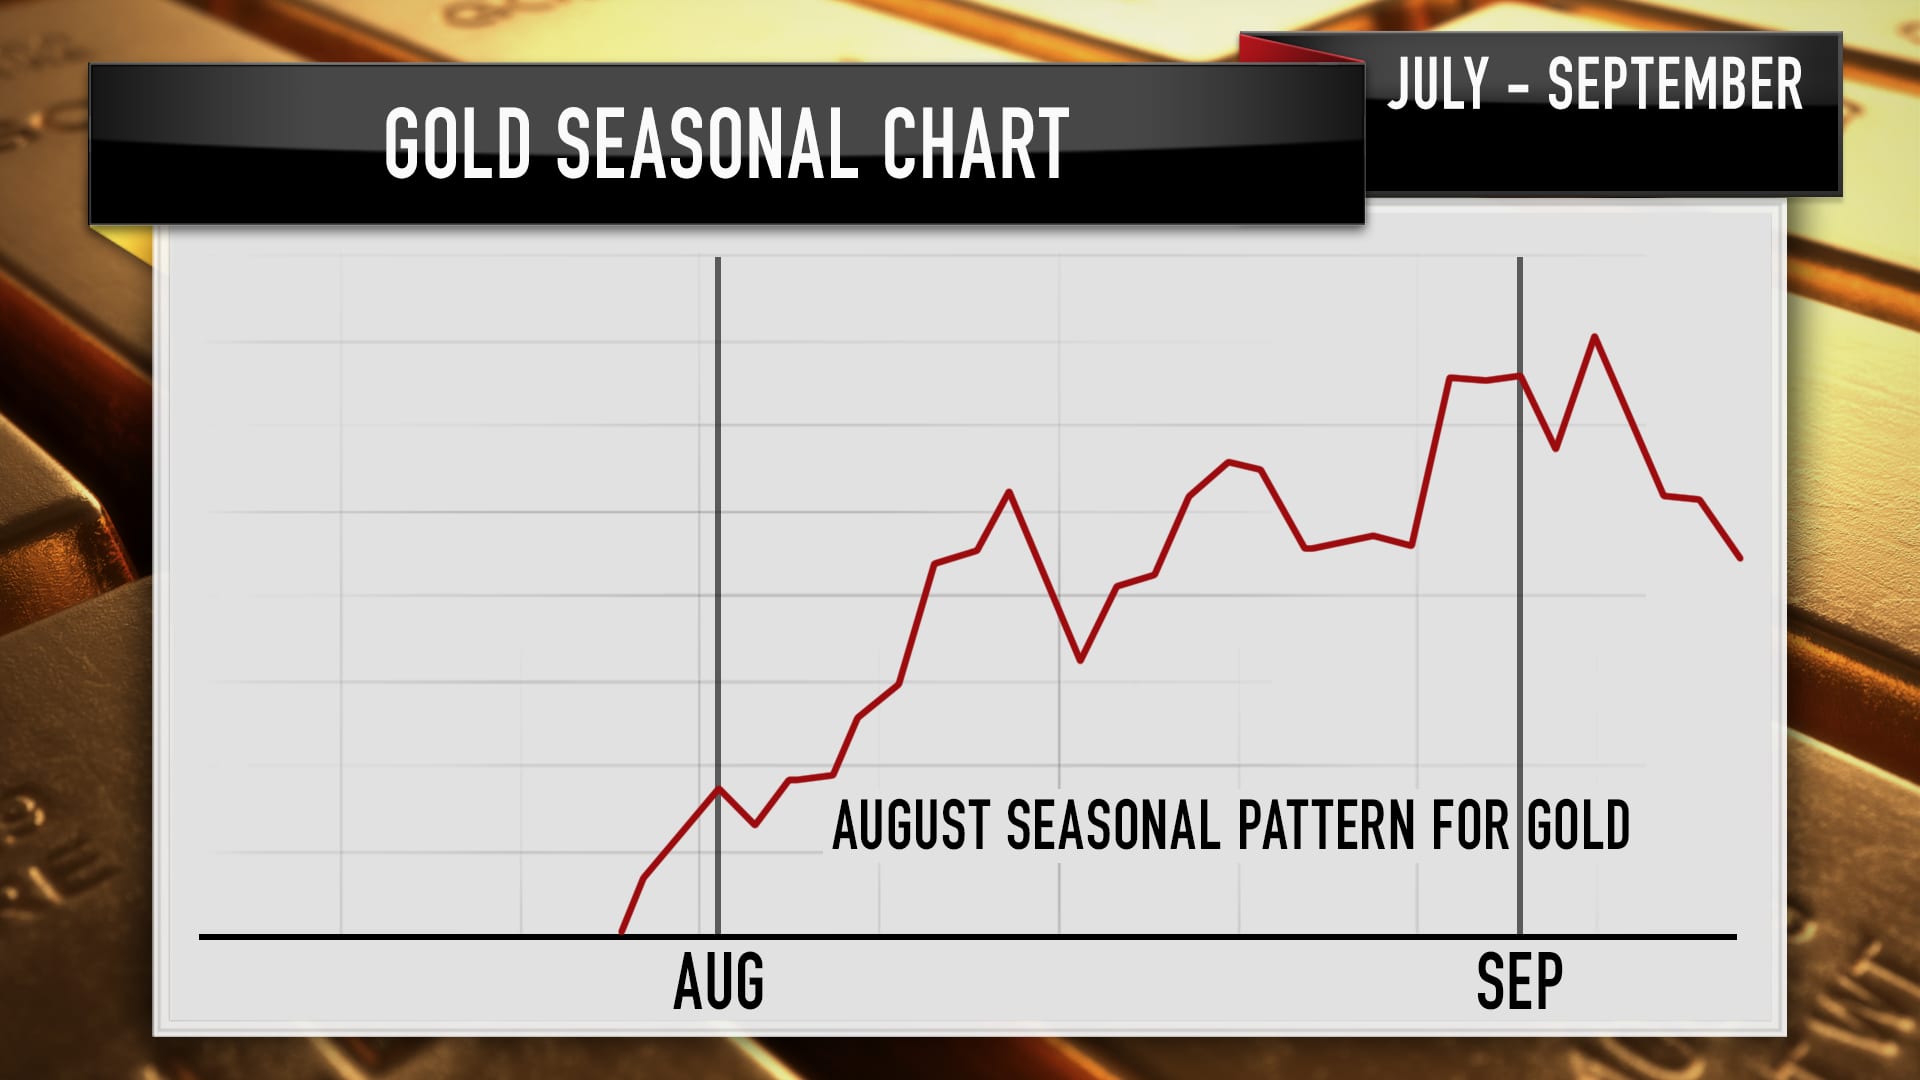 The seasonal trading pattern for gold around the month of August, based on technical analysis from Larry Williams.